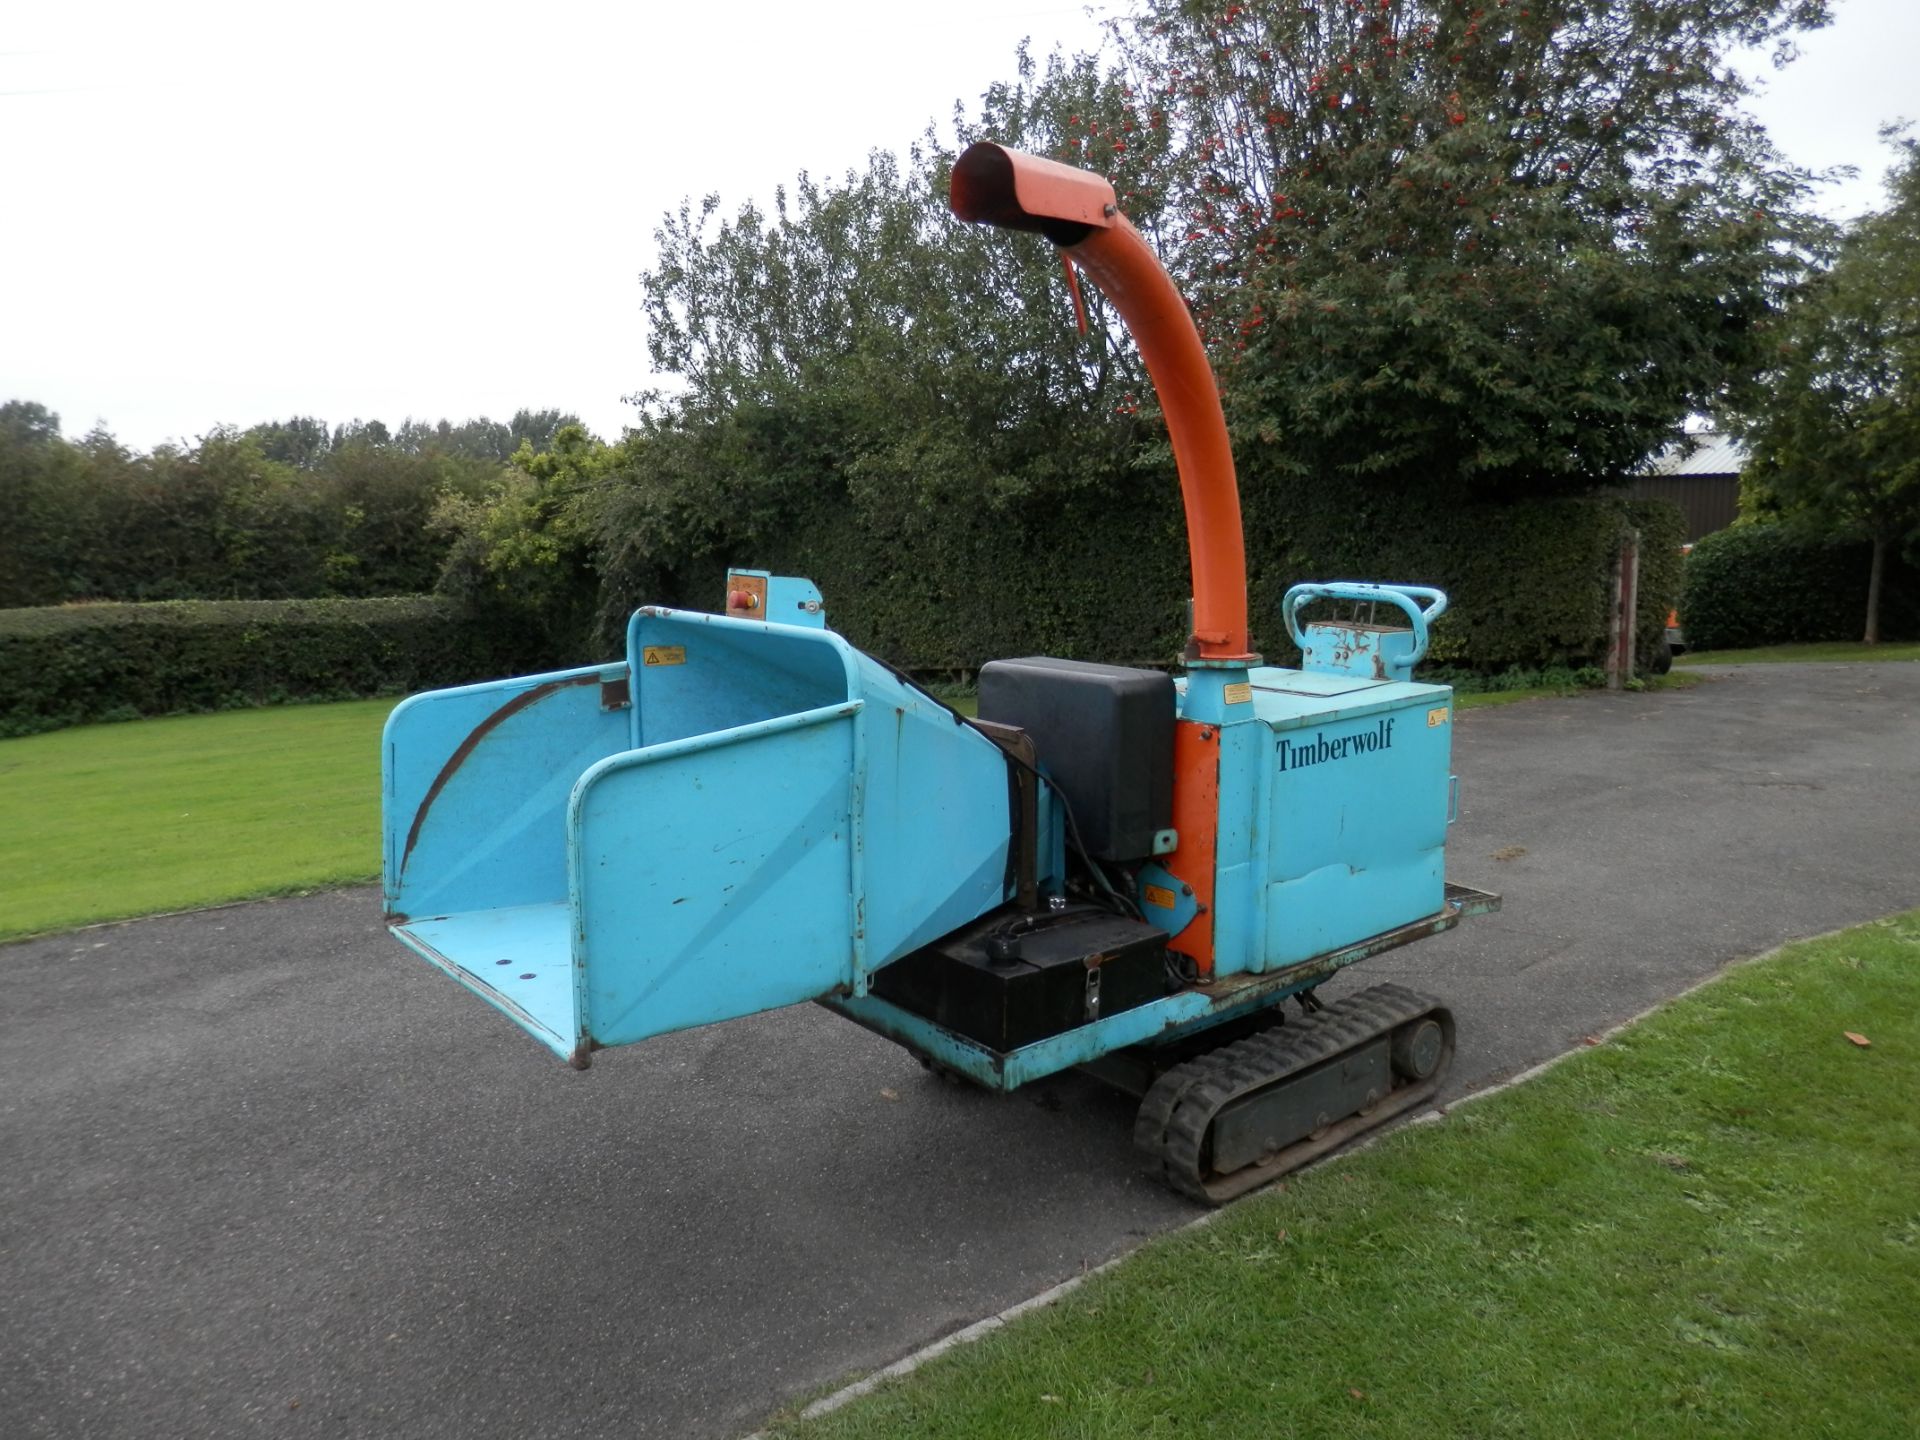 ALL WORKING TRACKED TIMBERWOLF DIESEL ENGINED 6" CHIPPER/SHREDDER, WITH RETRACTABLE TRACKS